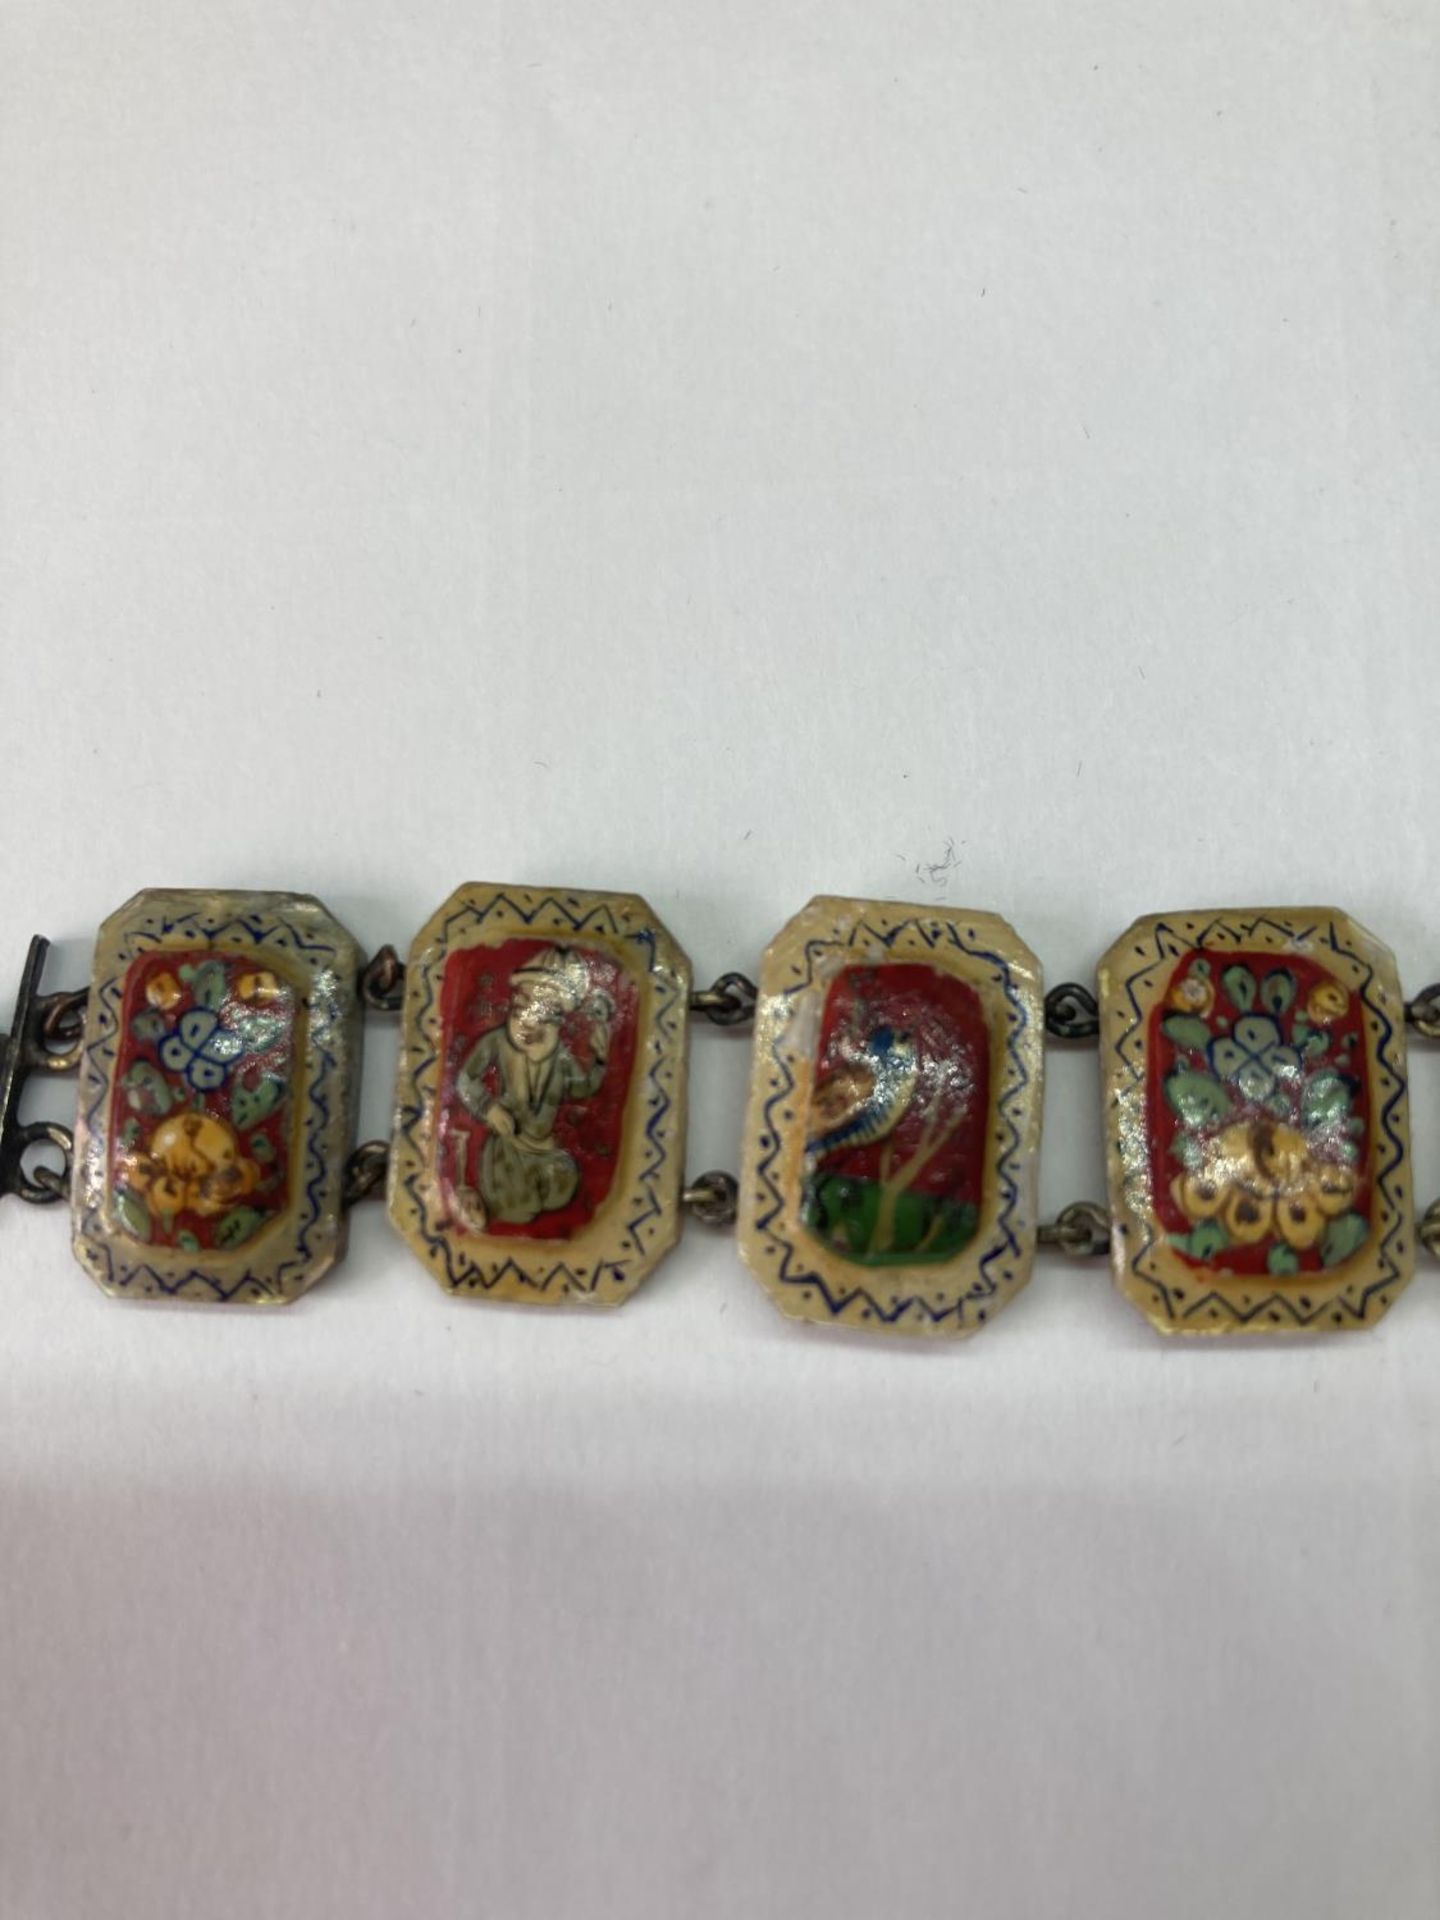 A DECORATIVE HAND PAINTED PERSIAN MOTHER OF PEARL BRACELET IN A PRESENTATION BOX - Image 6 of 12